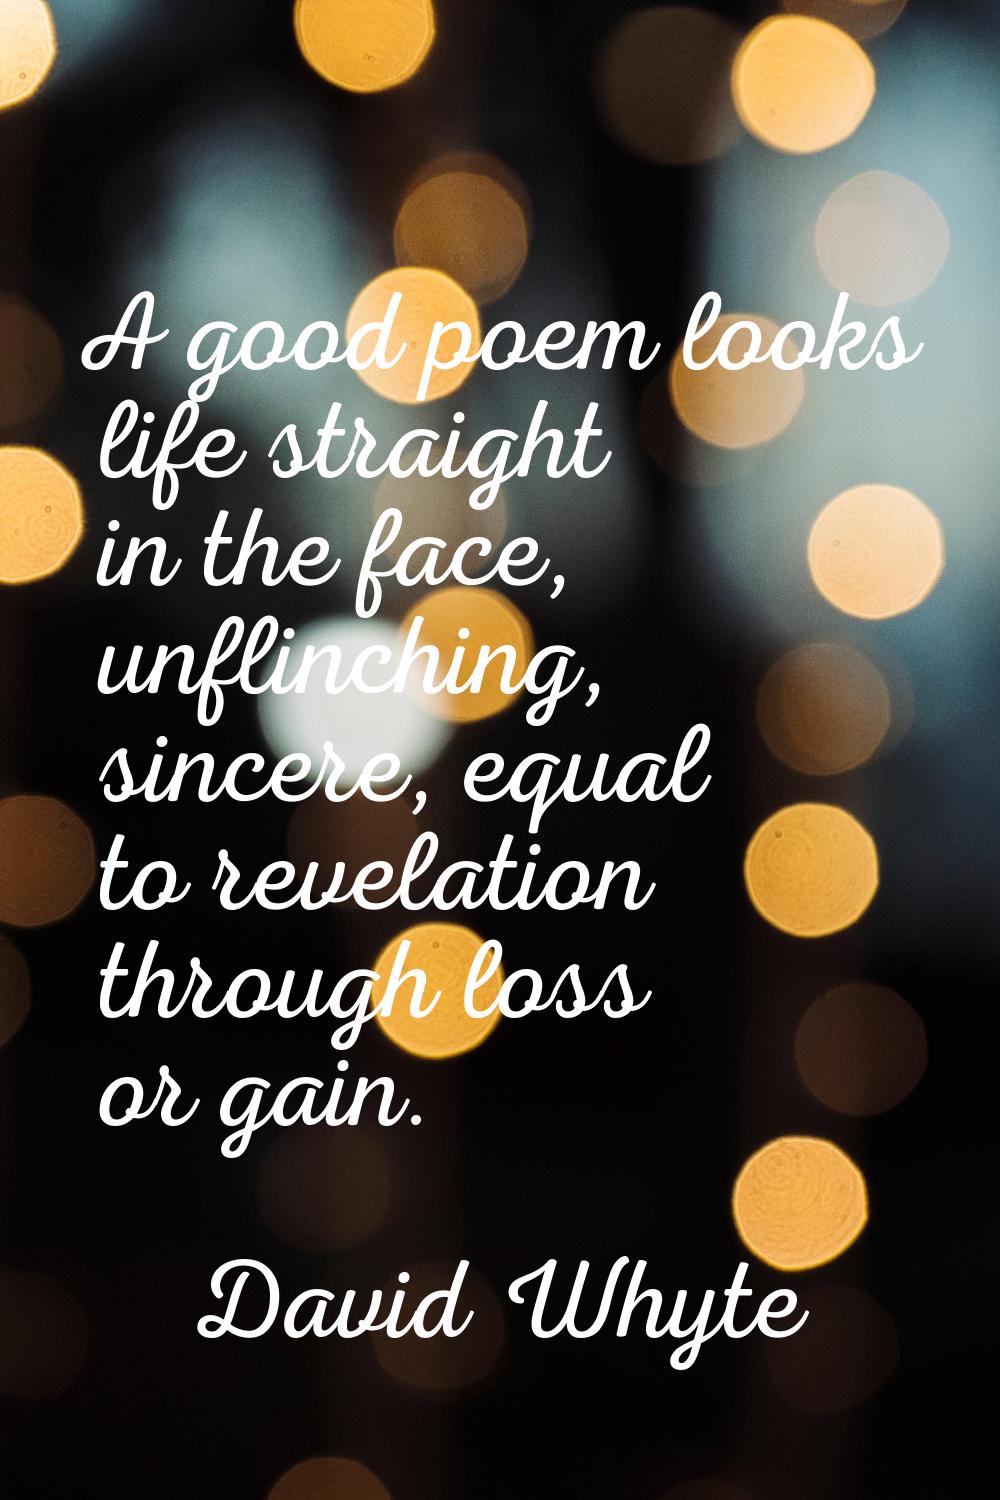 A good poem looks life straight in the face, unflinching, sincere, equal to revelation through loss